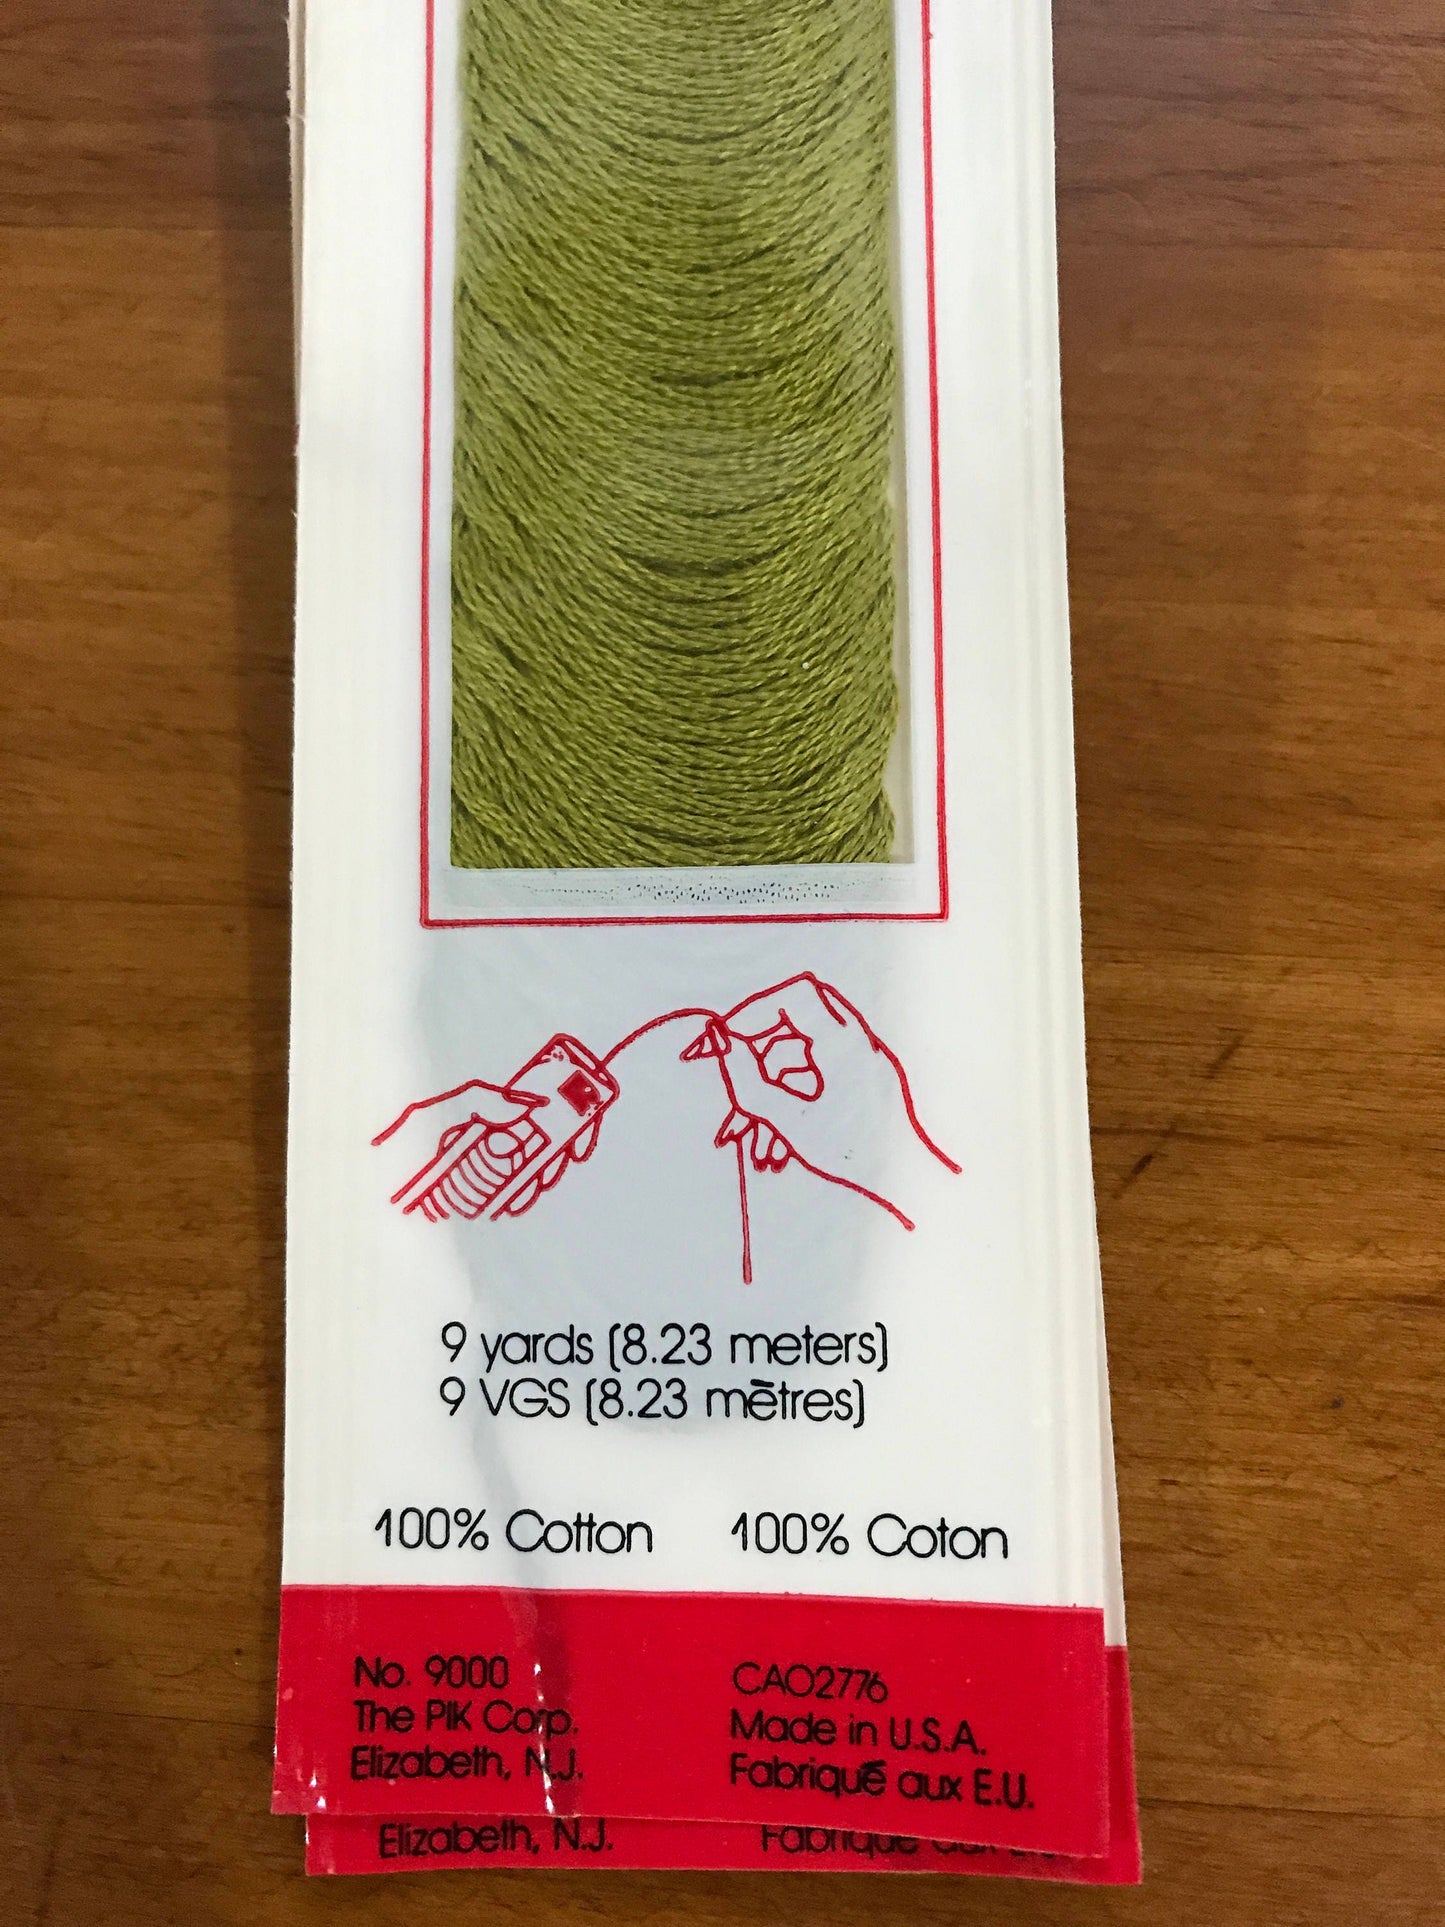 DMC Pik Corporation Embroidery floss, #733, 9 yards, vintage, hard to find, floss